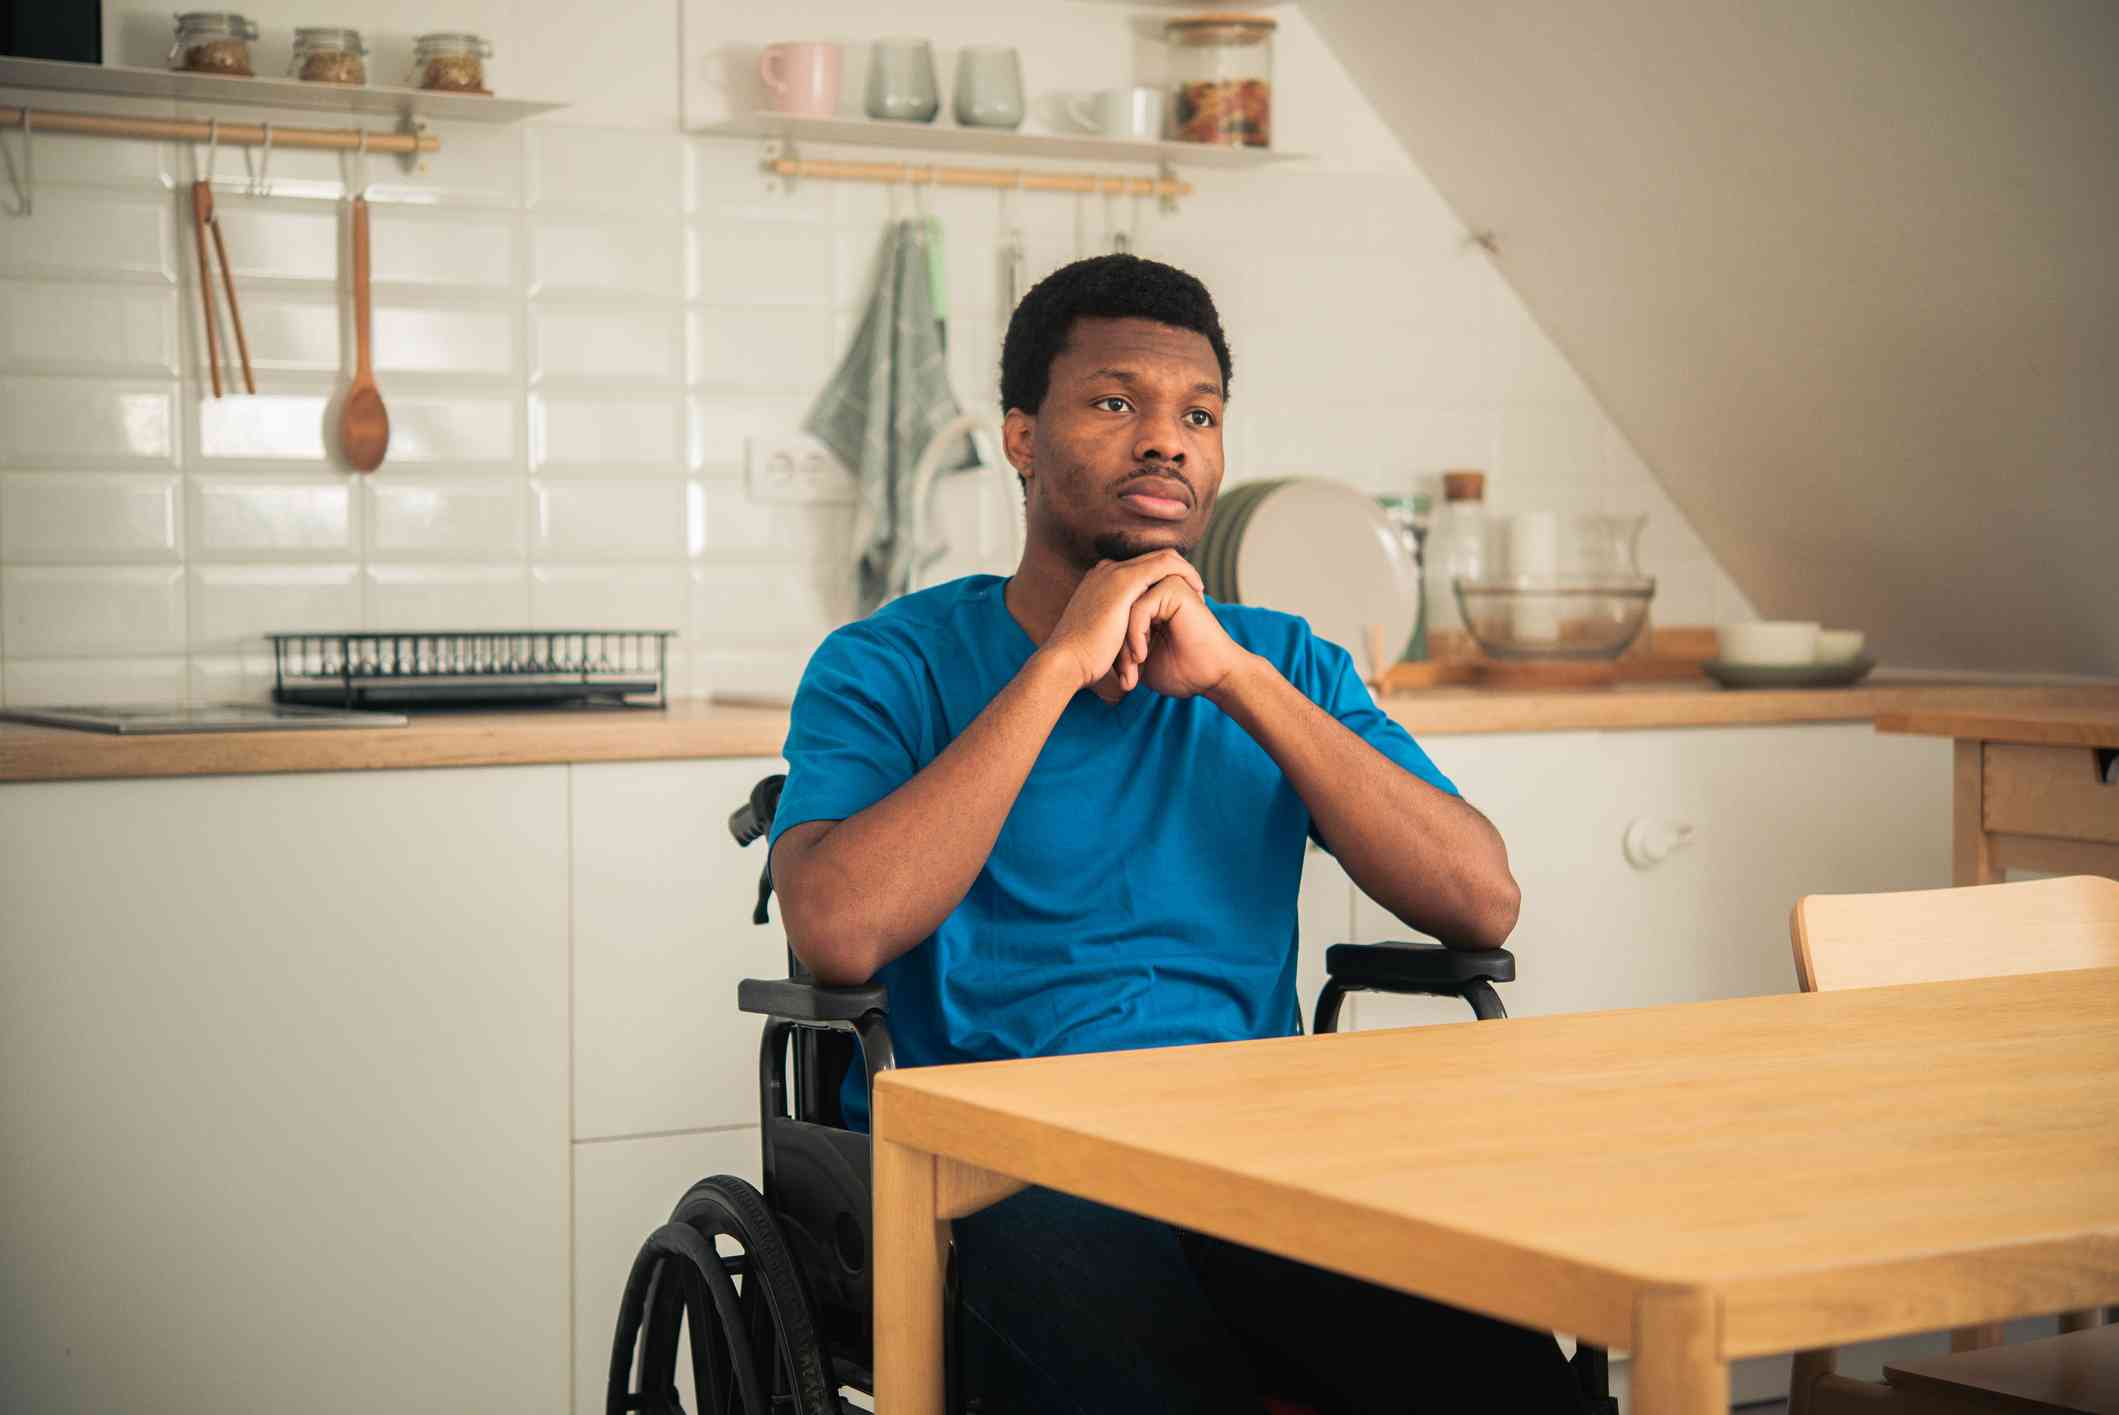 A man in a blue shirt sits in a wheelchair at a wooden table in the kitches and gazes off with a sad expression.